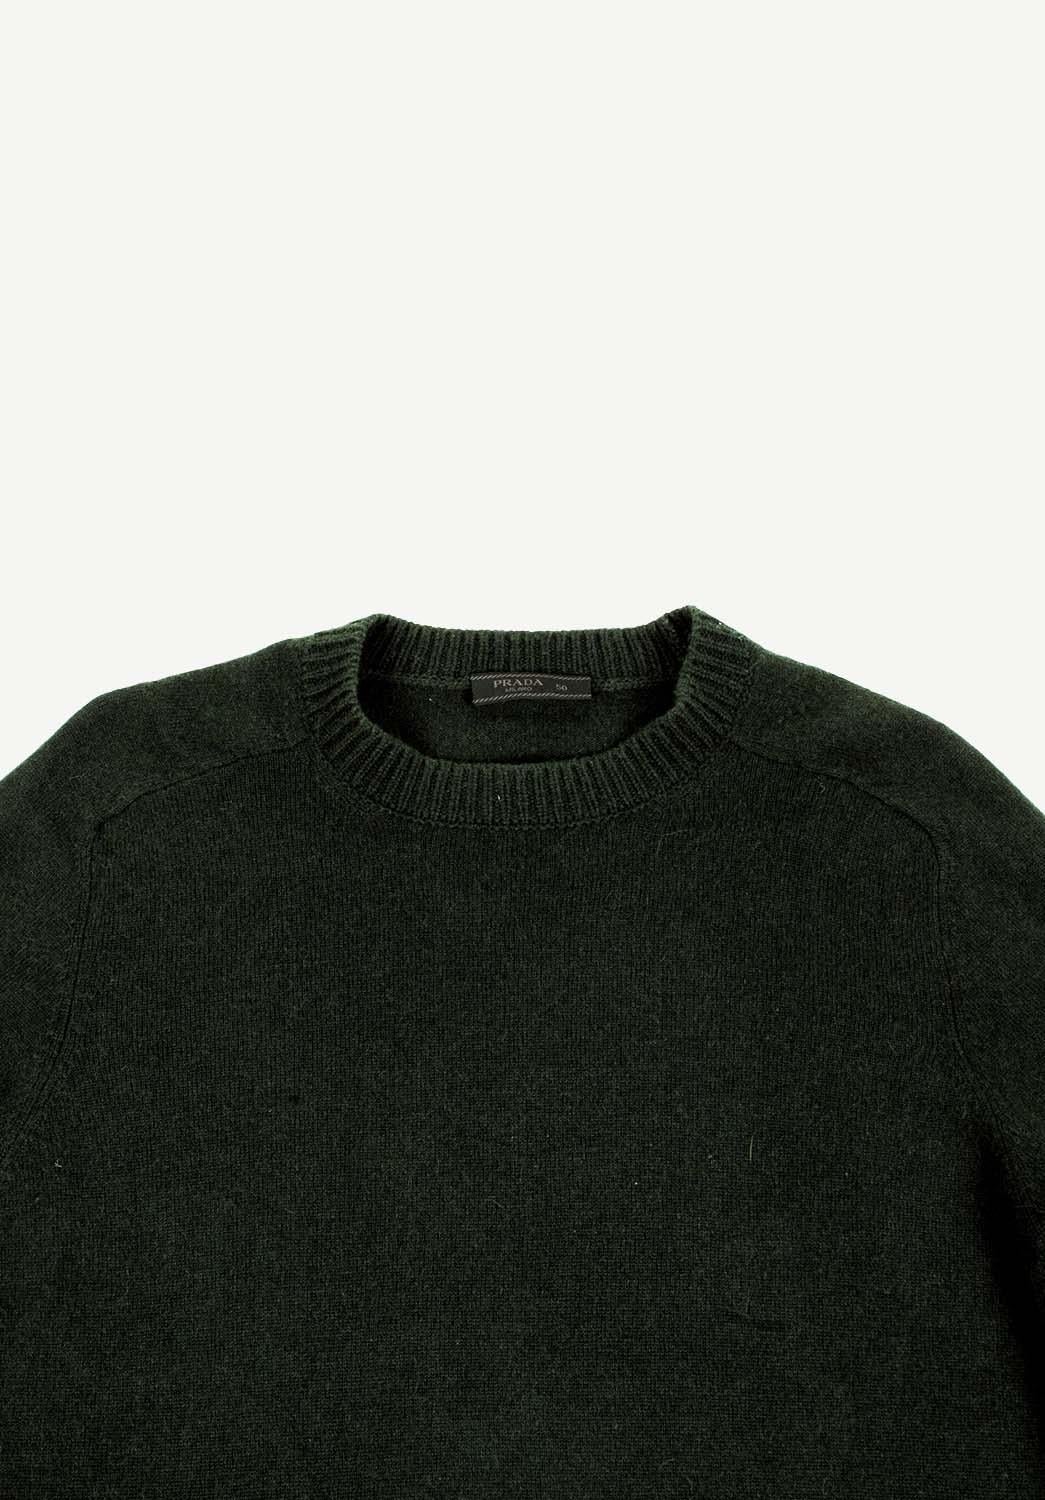 Item for sale is 100% genuine Prada Suede Elbows Men Sweater S106
Color: dark green
(An actual color may a bit vary due to individual computer screen interpretation)
Material: No care label, but it is 100 proc. Cashmere (feels when you touch it)
Tag